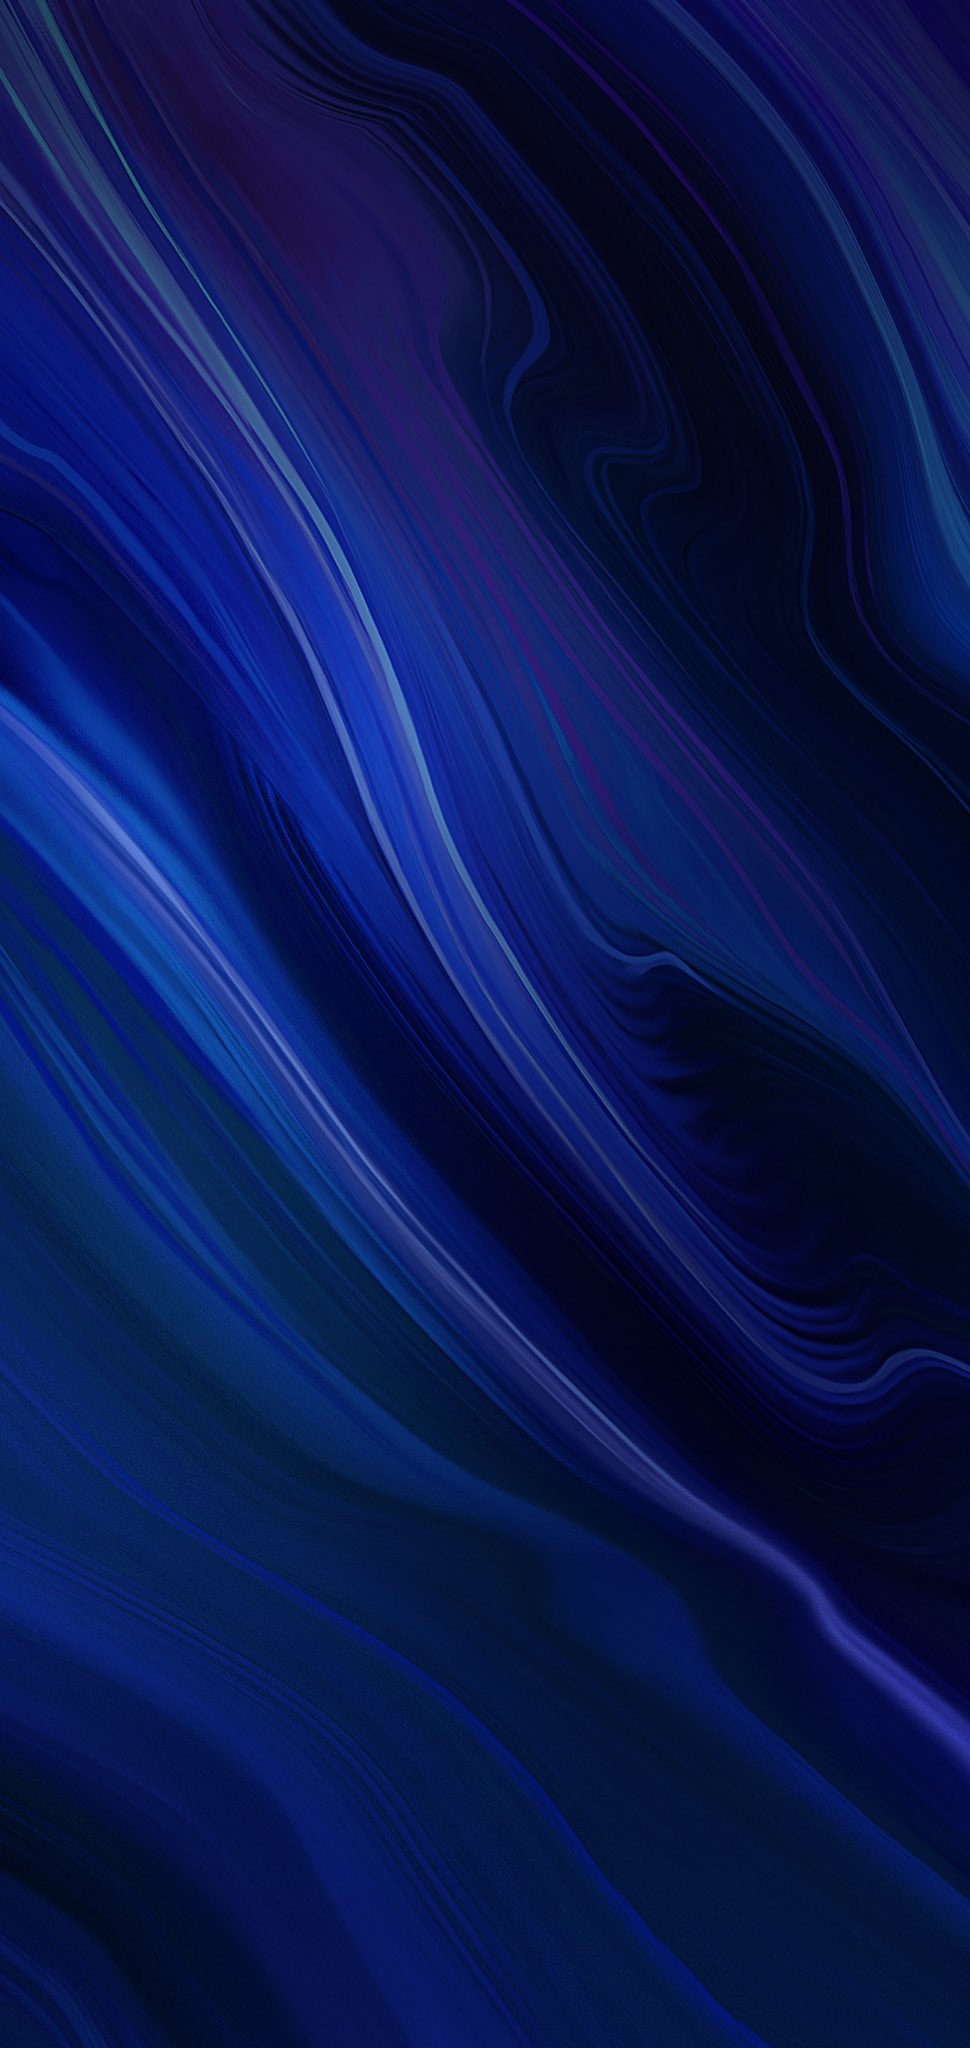 Pacific Blue iphone wallpaper idownloadblog smartechdaily abstract